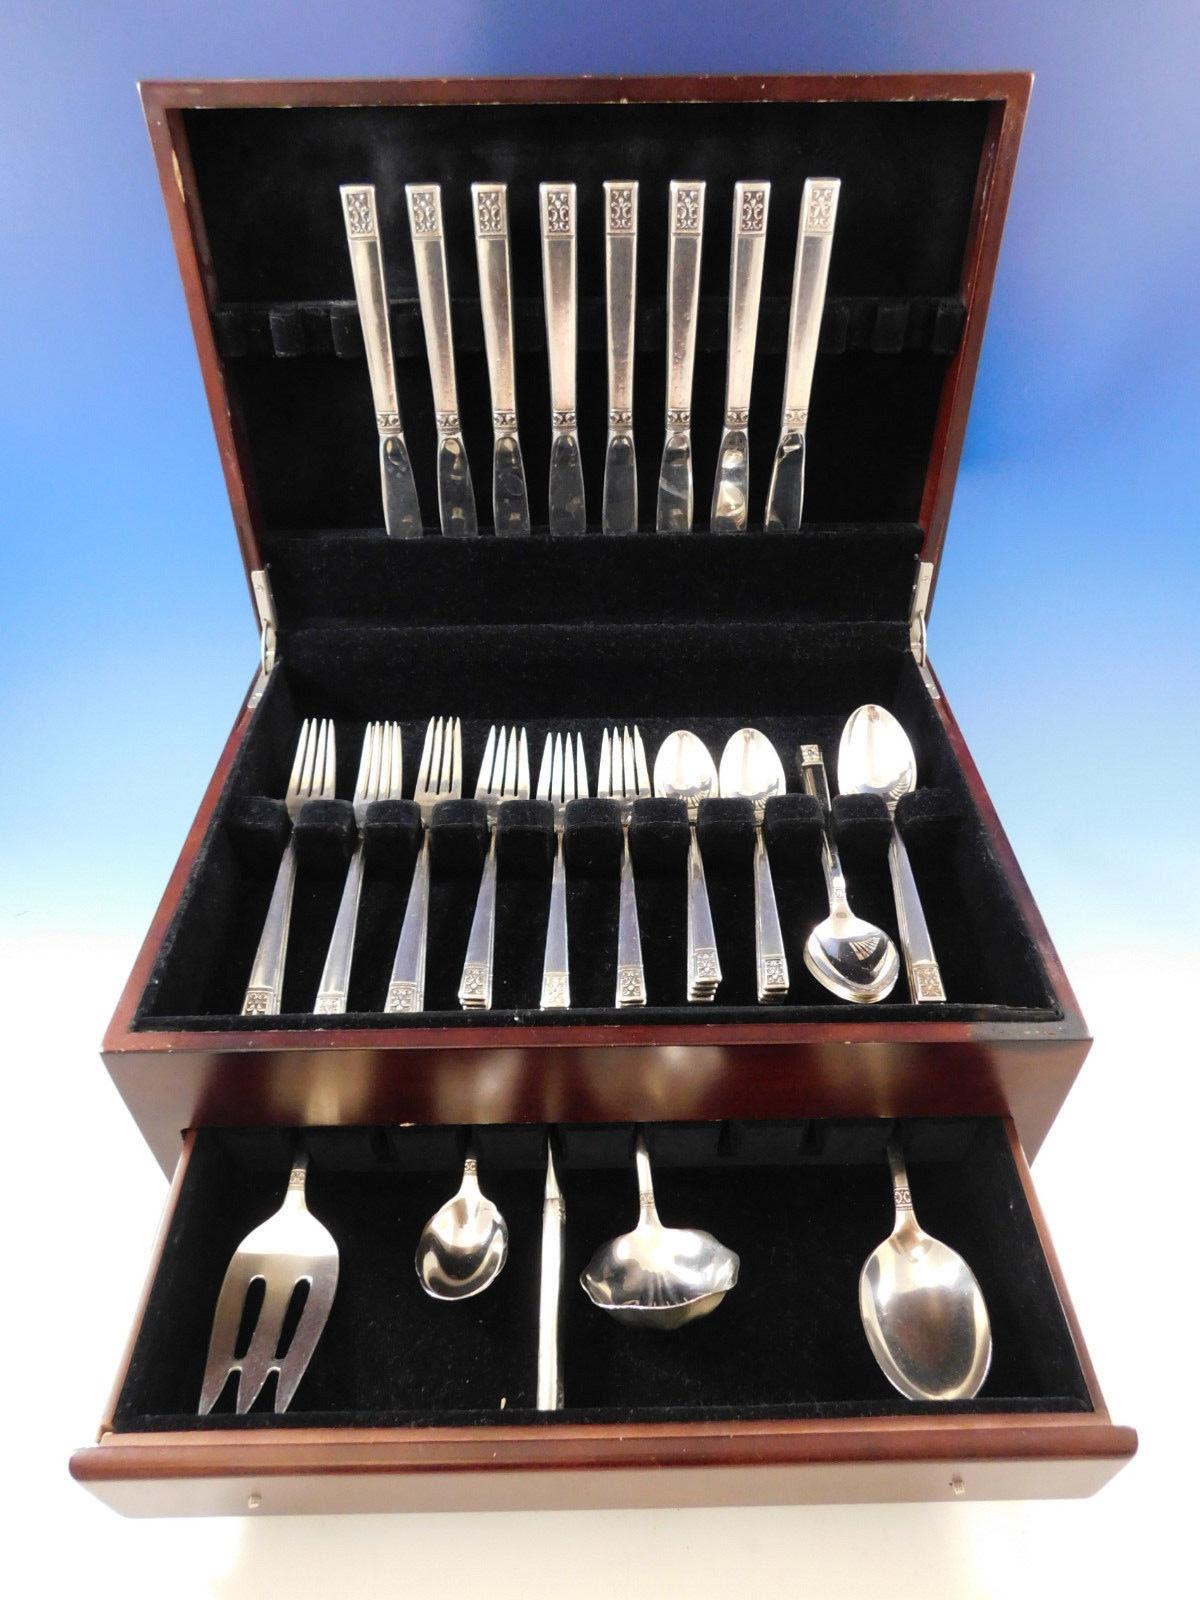 Laureate by Towle sterling silver Flatware set - 45 pieces. This set includes:

8 knives, 8 7/8